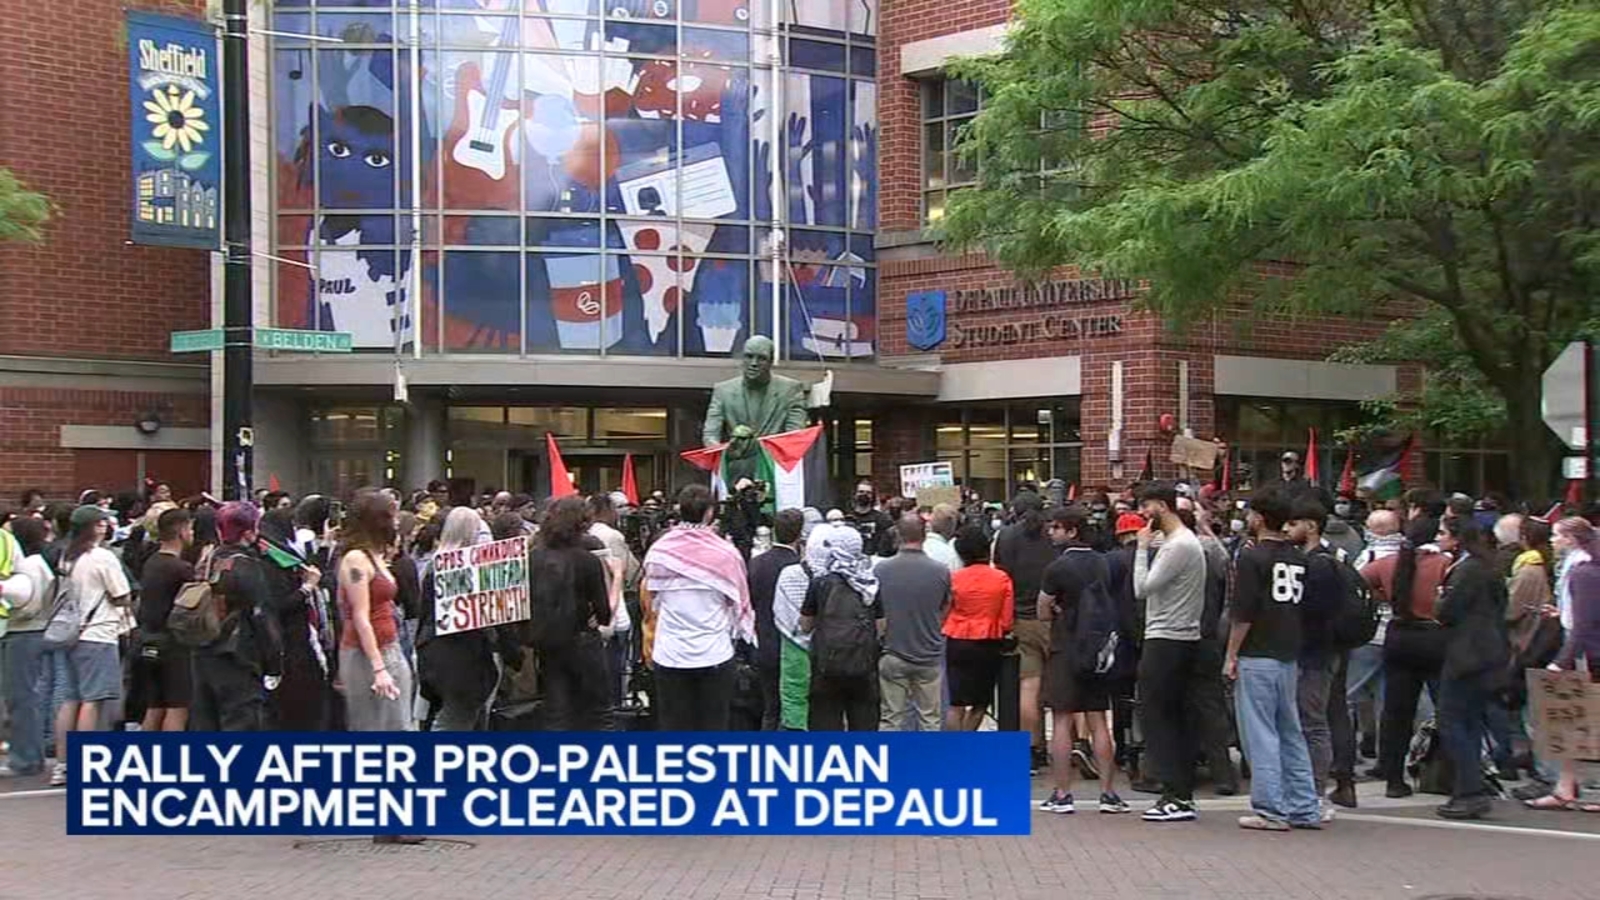 Chicago police clear out DePaul University pro-Palestinian protest encampment on Lincoln Park campus; 2 arrested [Video]